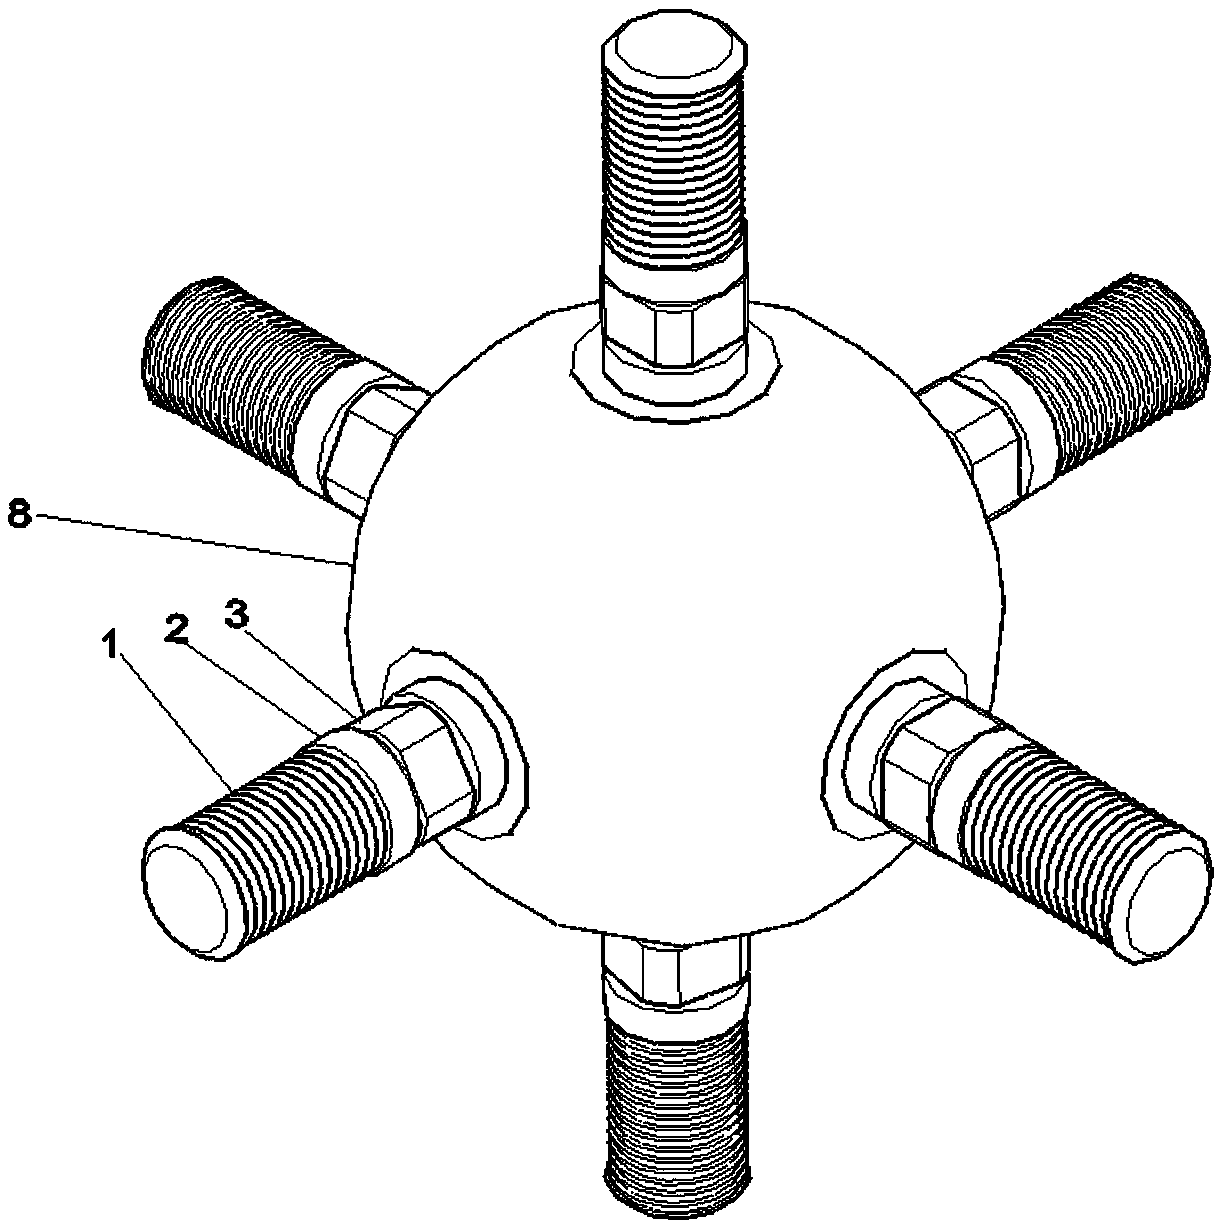 Screw joint spherical hinge structure suitable for truss connection